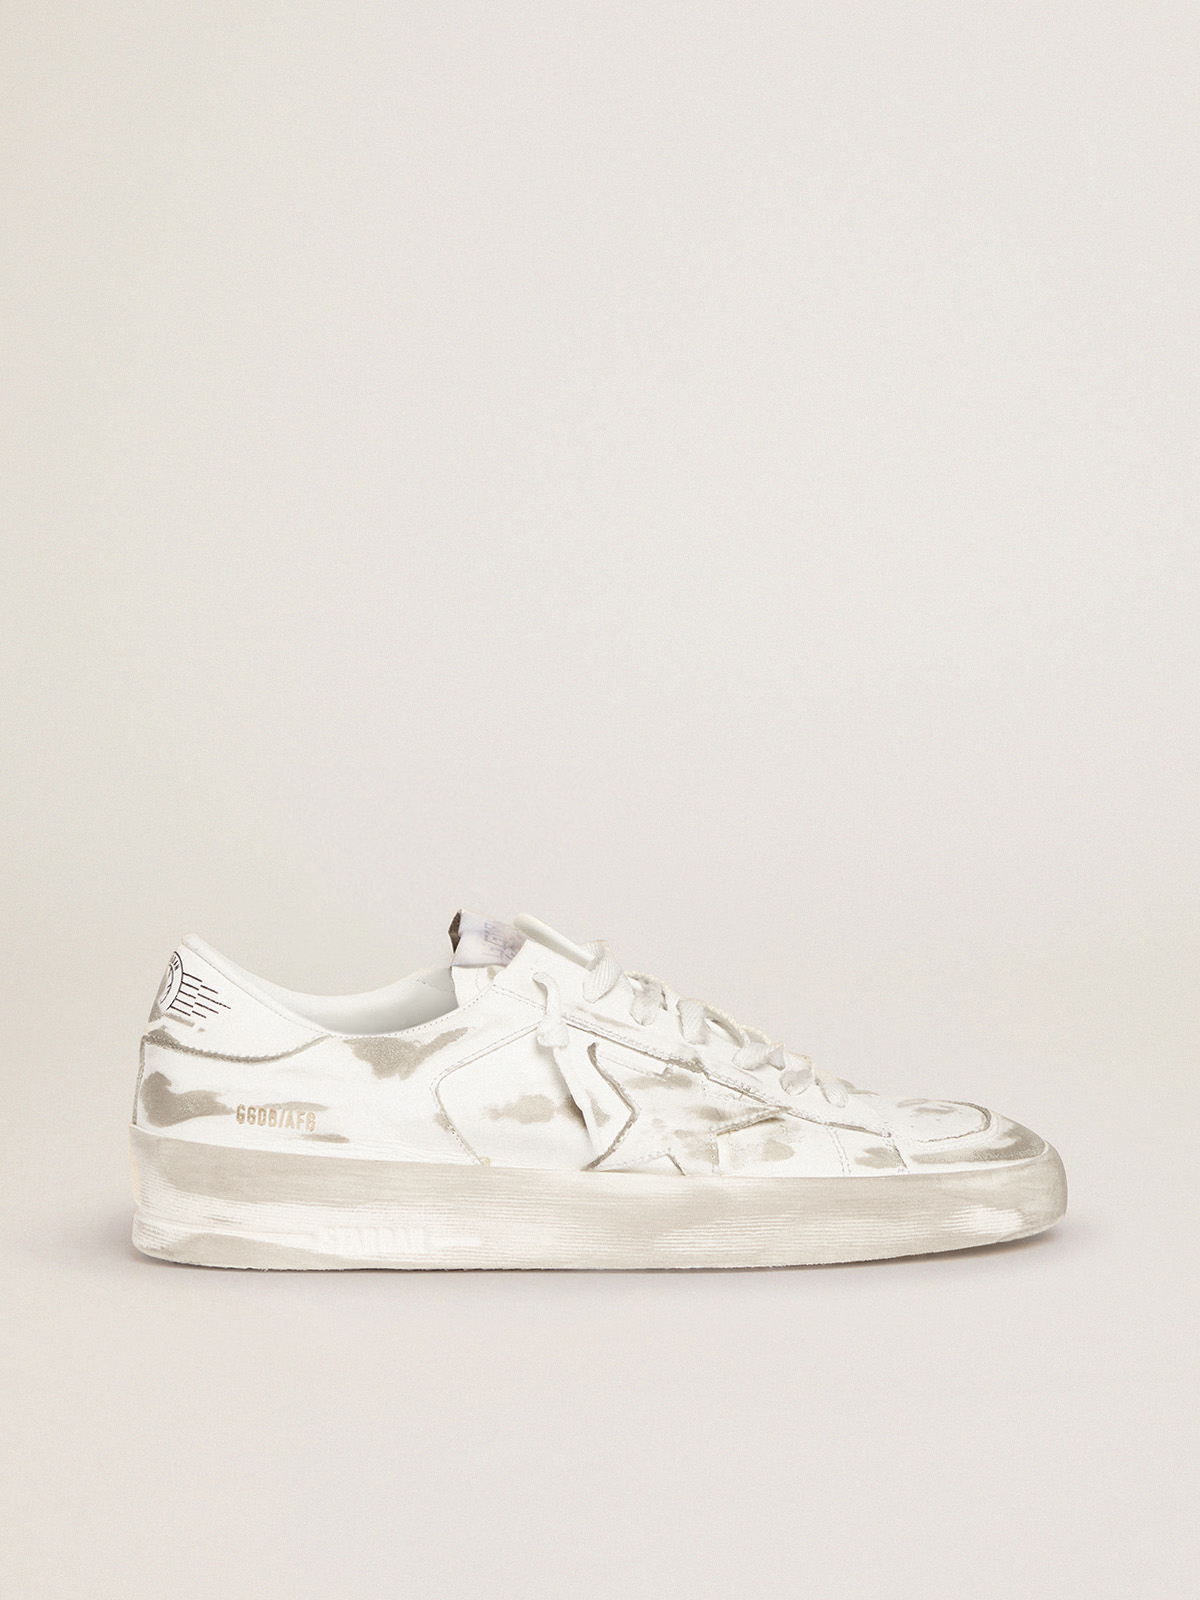 Stardan sneakers in white leather with lived-in treatment | Golden Goose